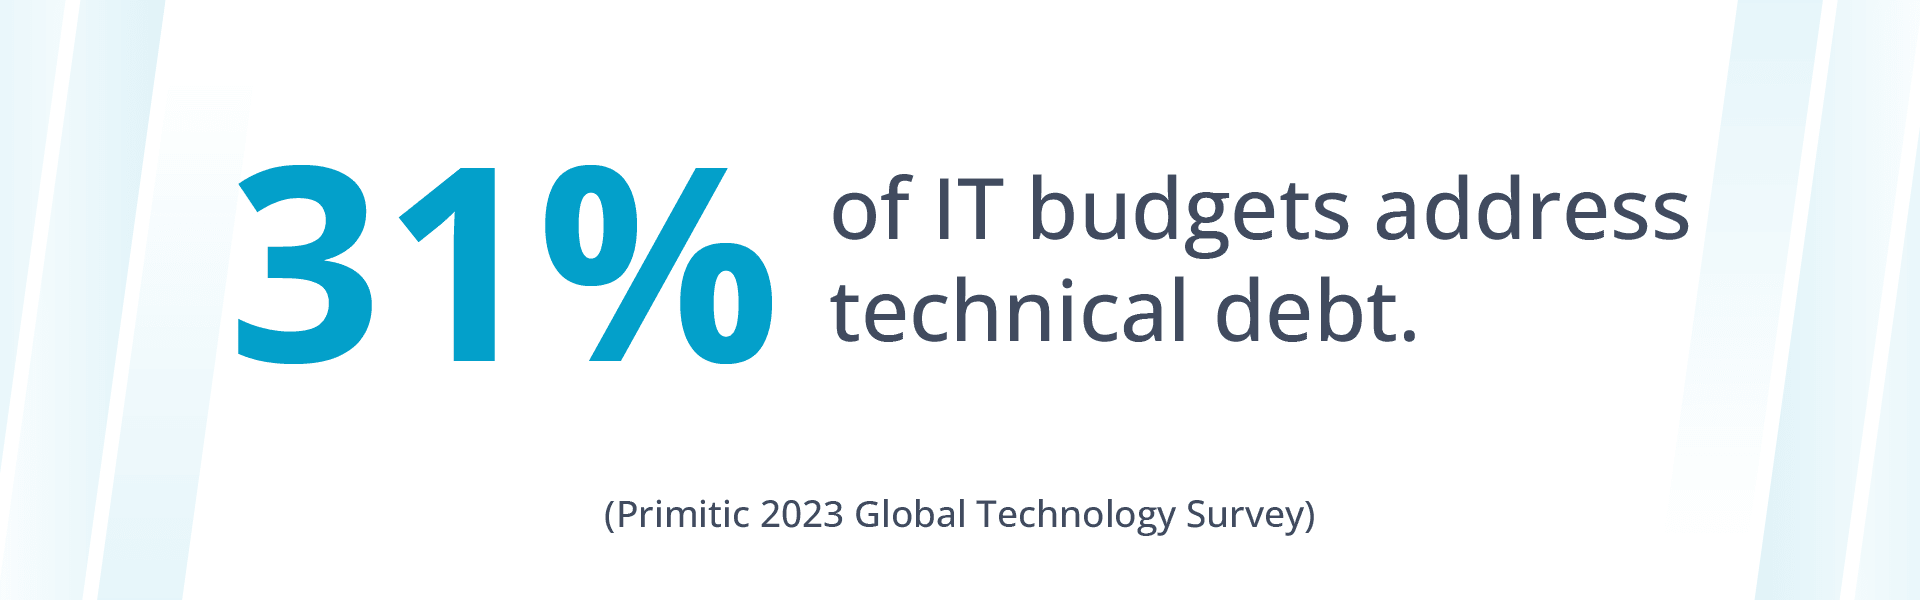 Technical debt share of organizations’ IT budgets.